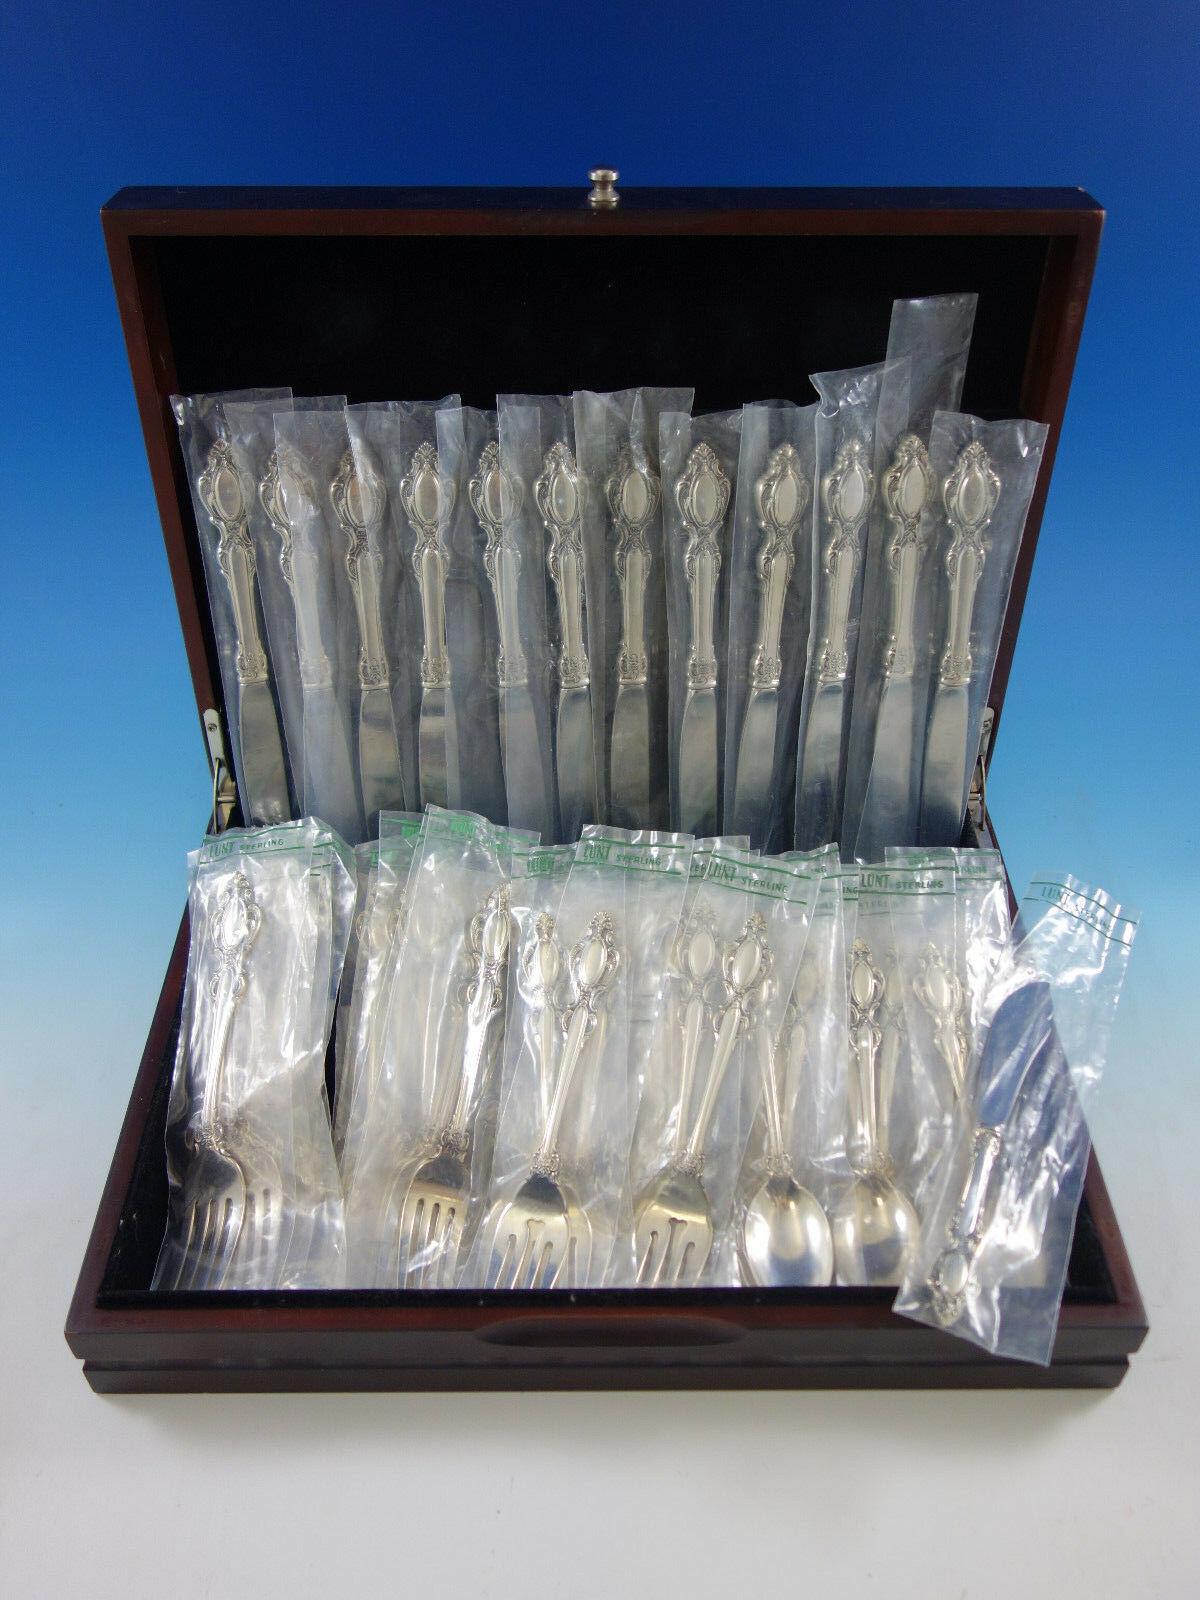 New, unused Lasting Grace by Lunt sterling silver flatware set - 49 pieces. This set includes:

12 knives, 9